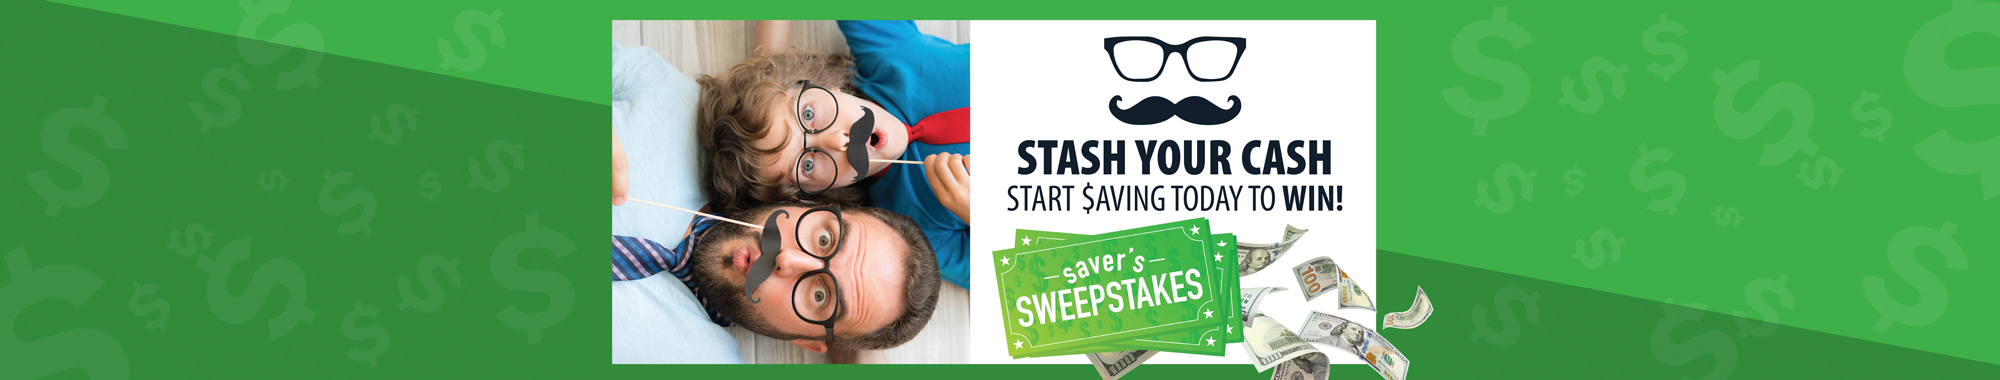 Want to get rewarded for saving? Click here!